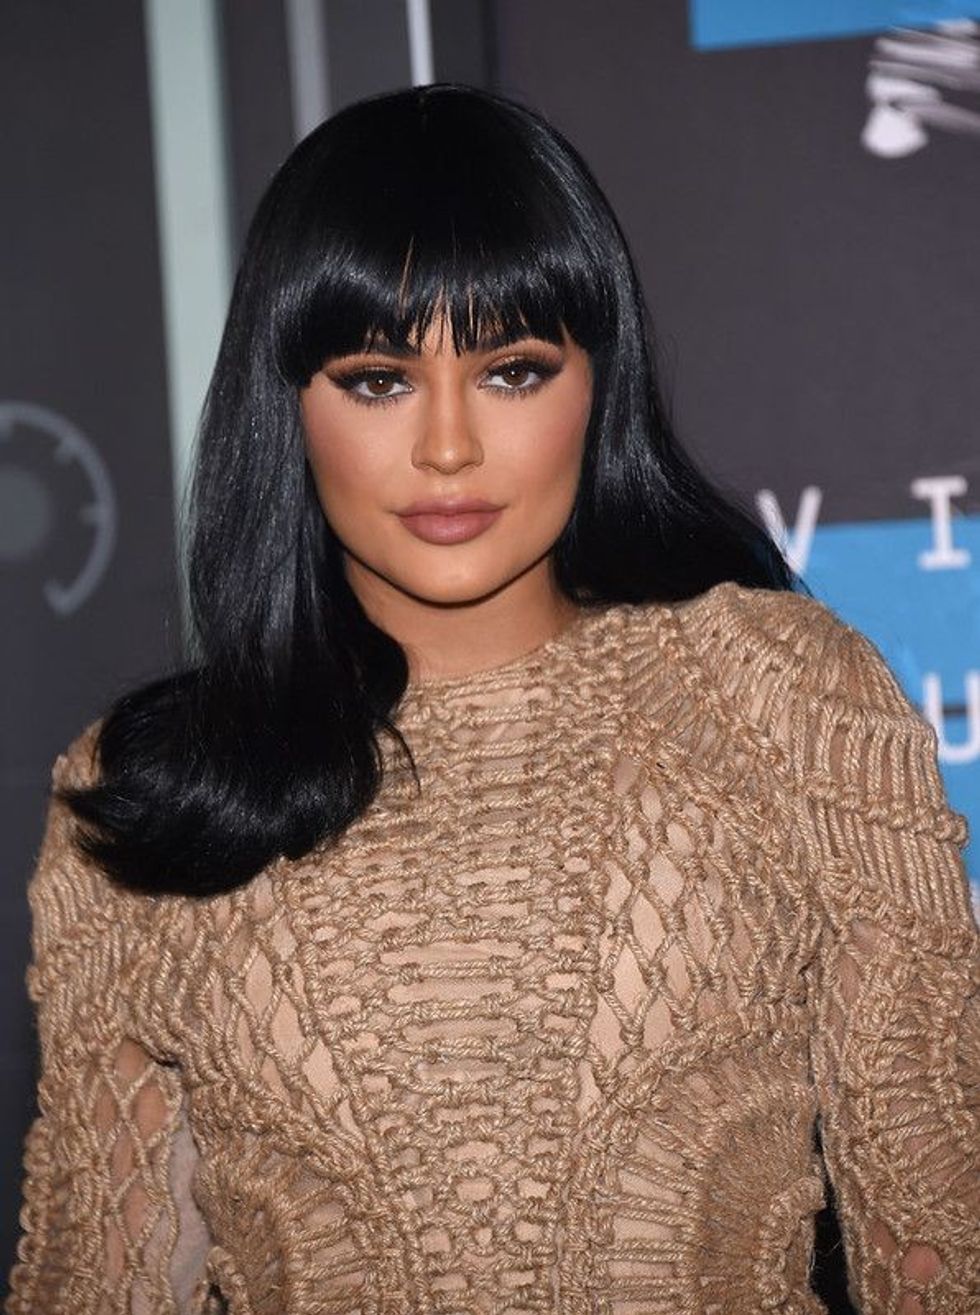 Interesting Kylie Jenner quotes reveal that she is a pop culture icon who inspires young talents with her quotes.